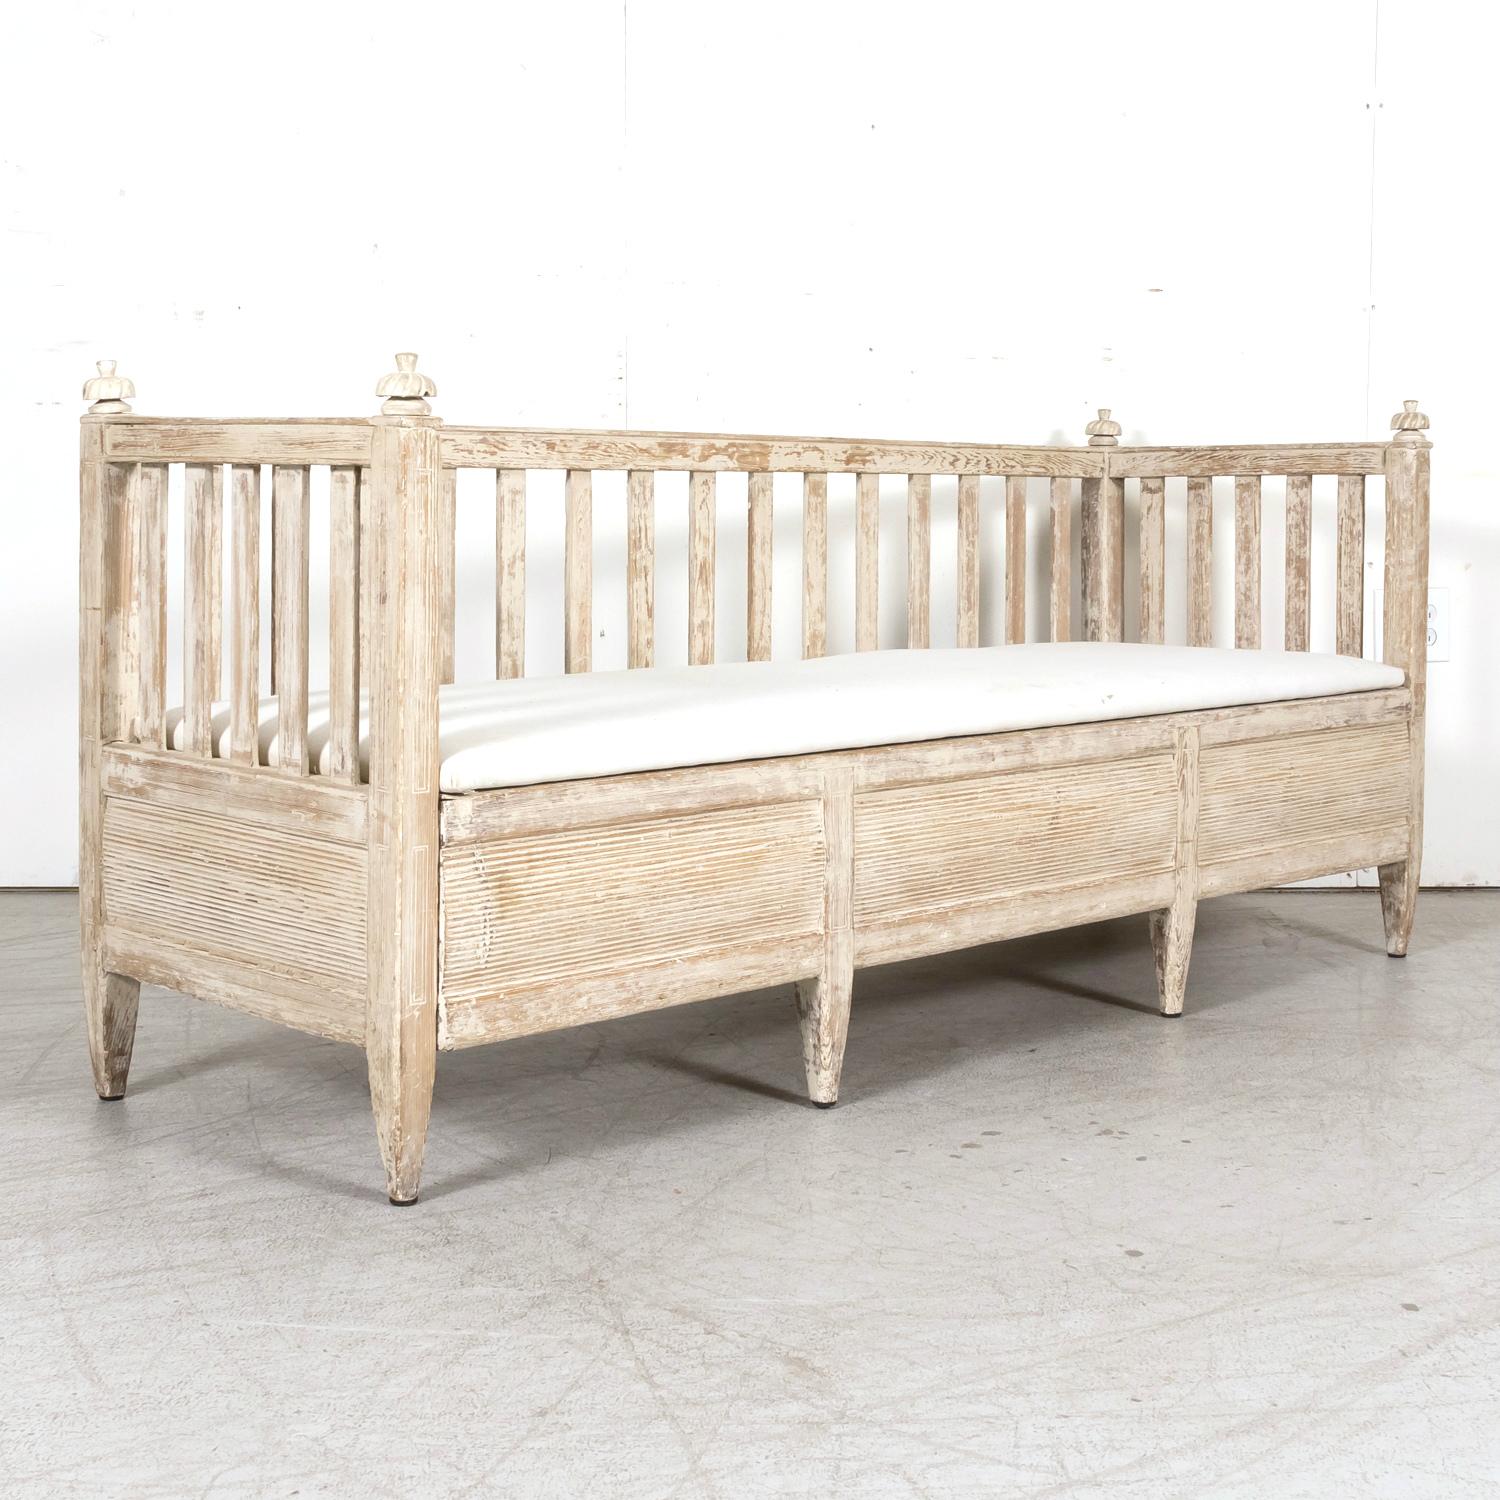 19th Century Swedish Gustavian Style Painted Stickback Sofa Bench with Lift Seat For Sale 3